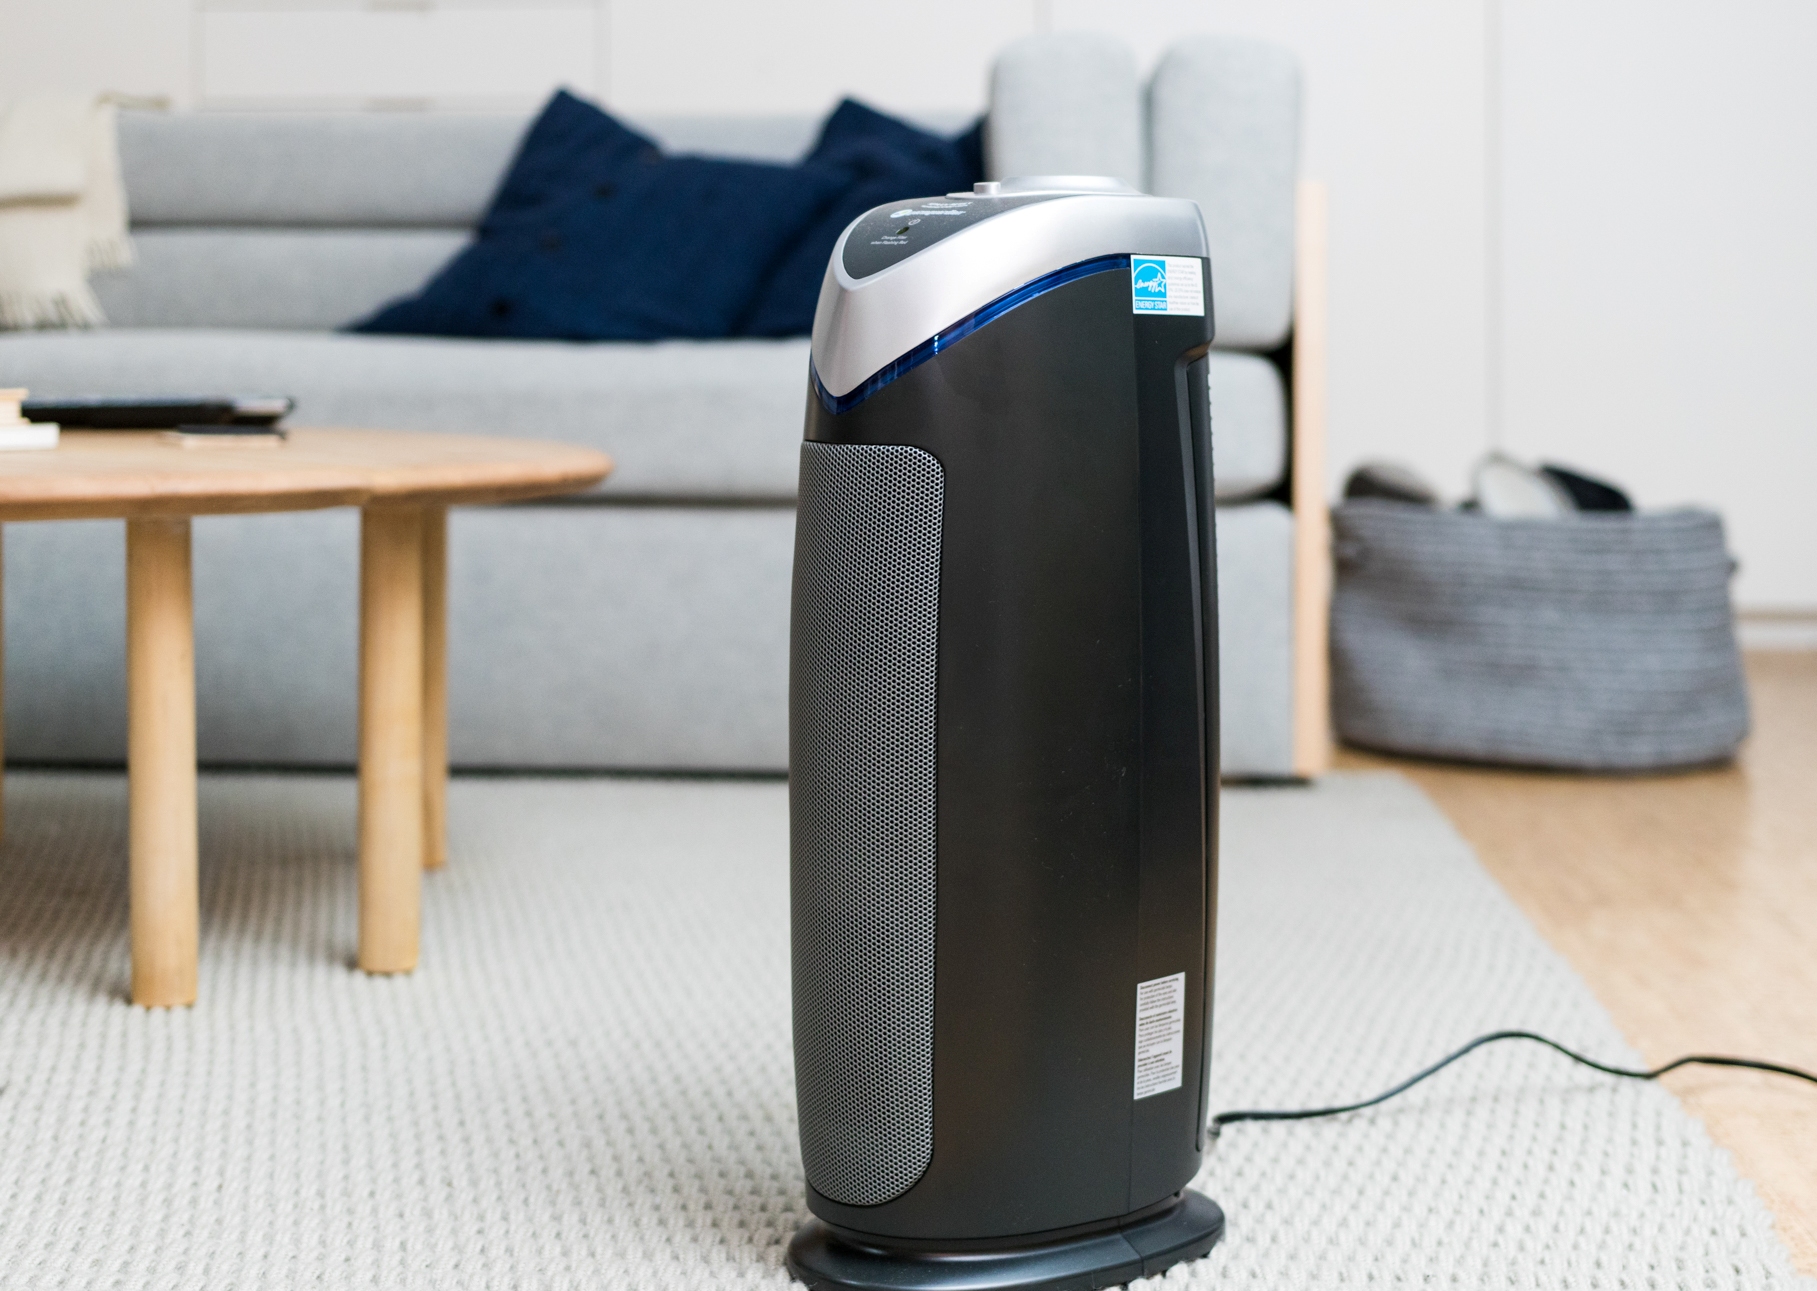 The Amazing Features To Look For In Buying Air Purifier